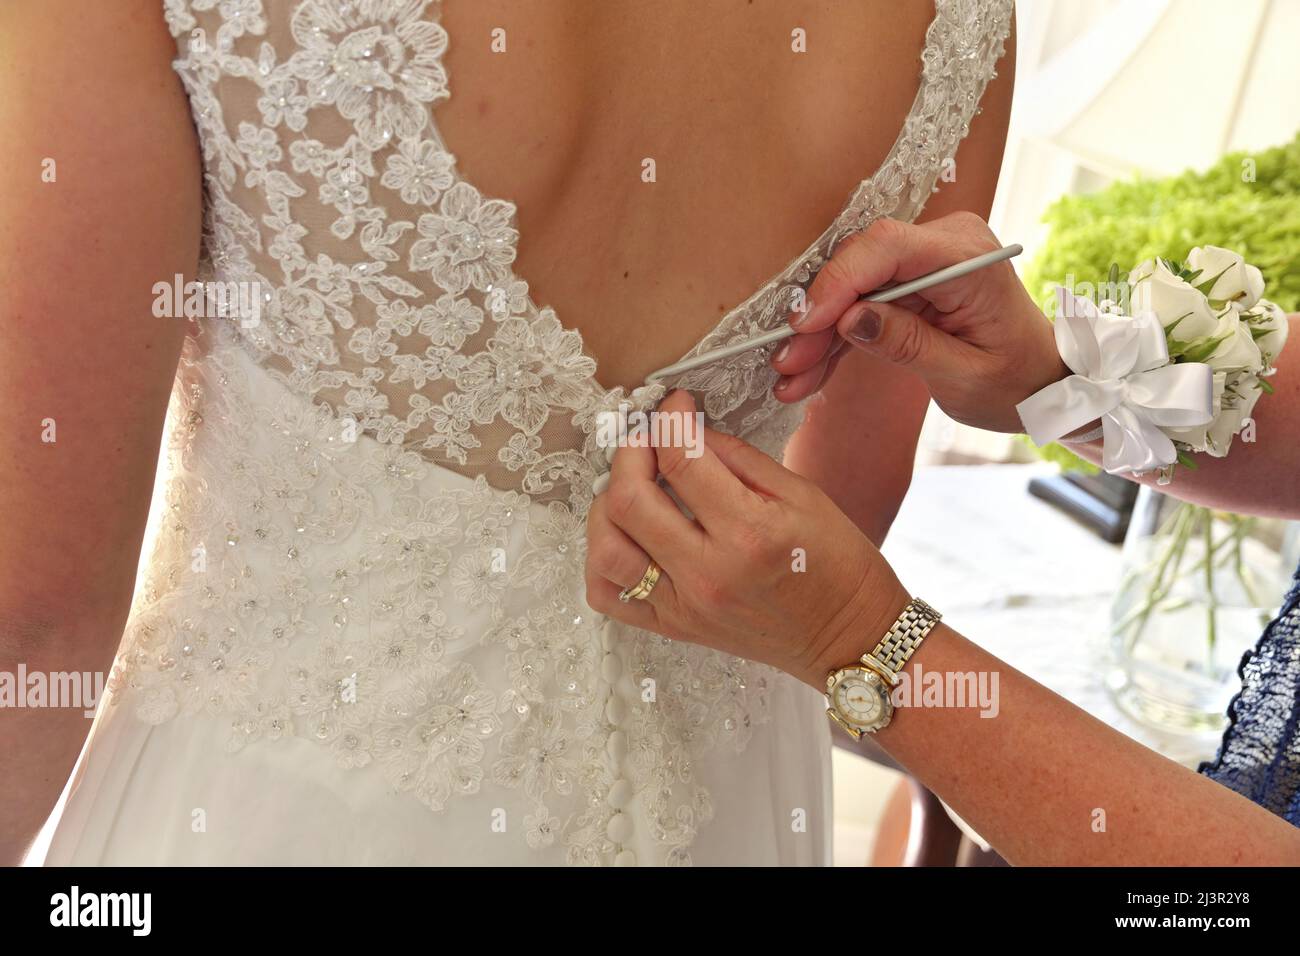 Close up of Hands Doing Final Buttoning of Bride's Wedding Dress Stock Photo